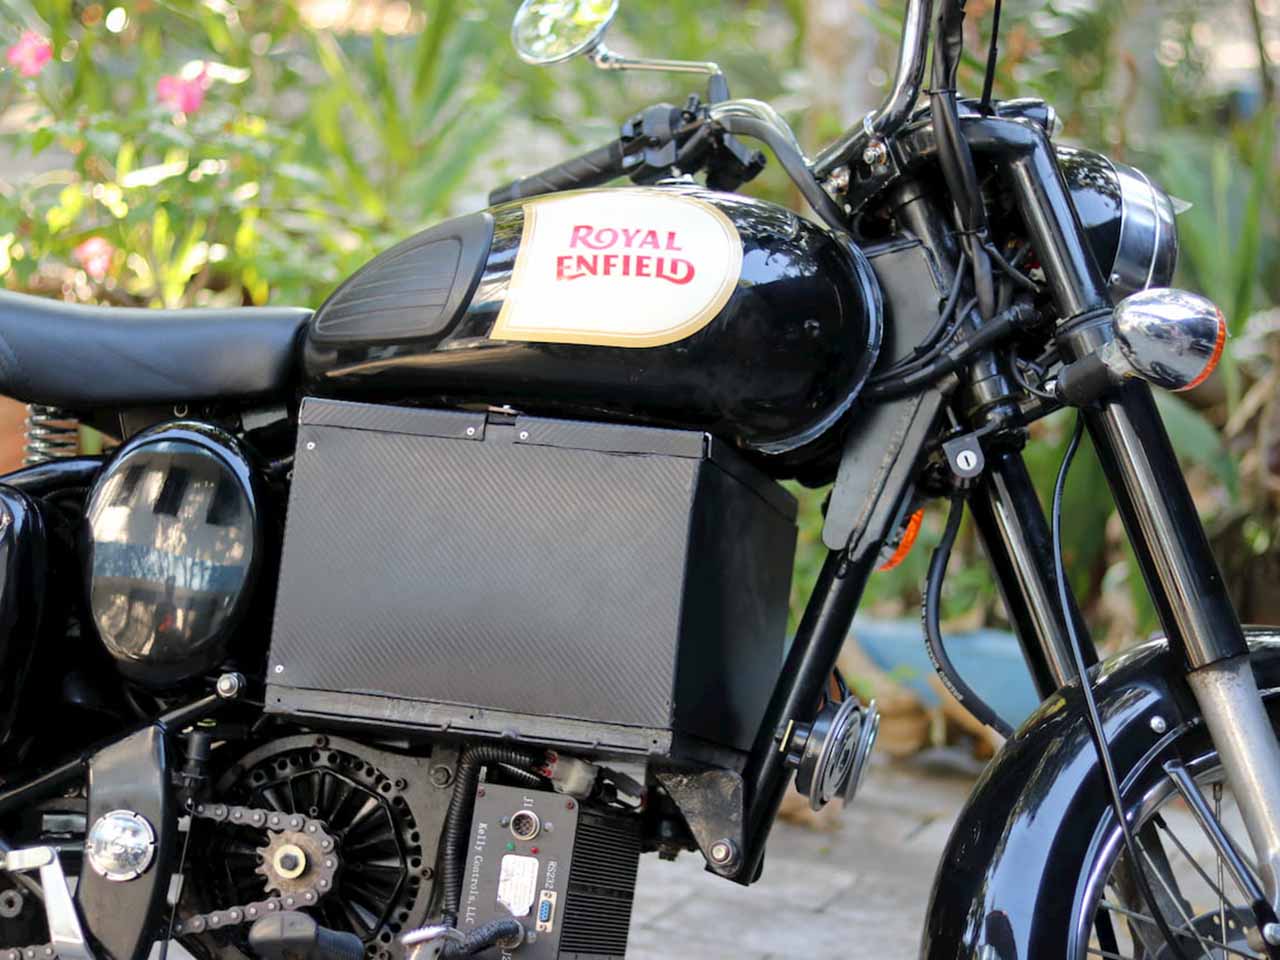 Royal Enfield Classic 350 modified electric motorcycle from Kerala